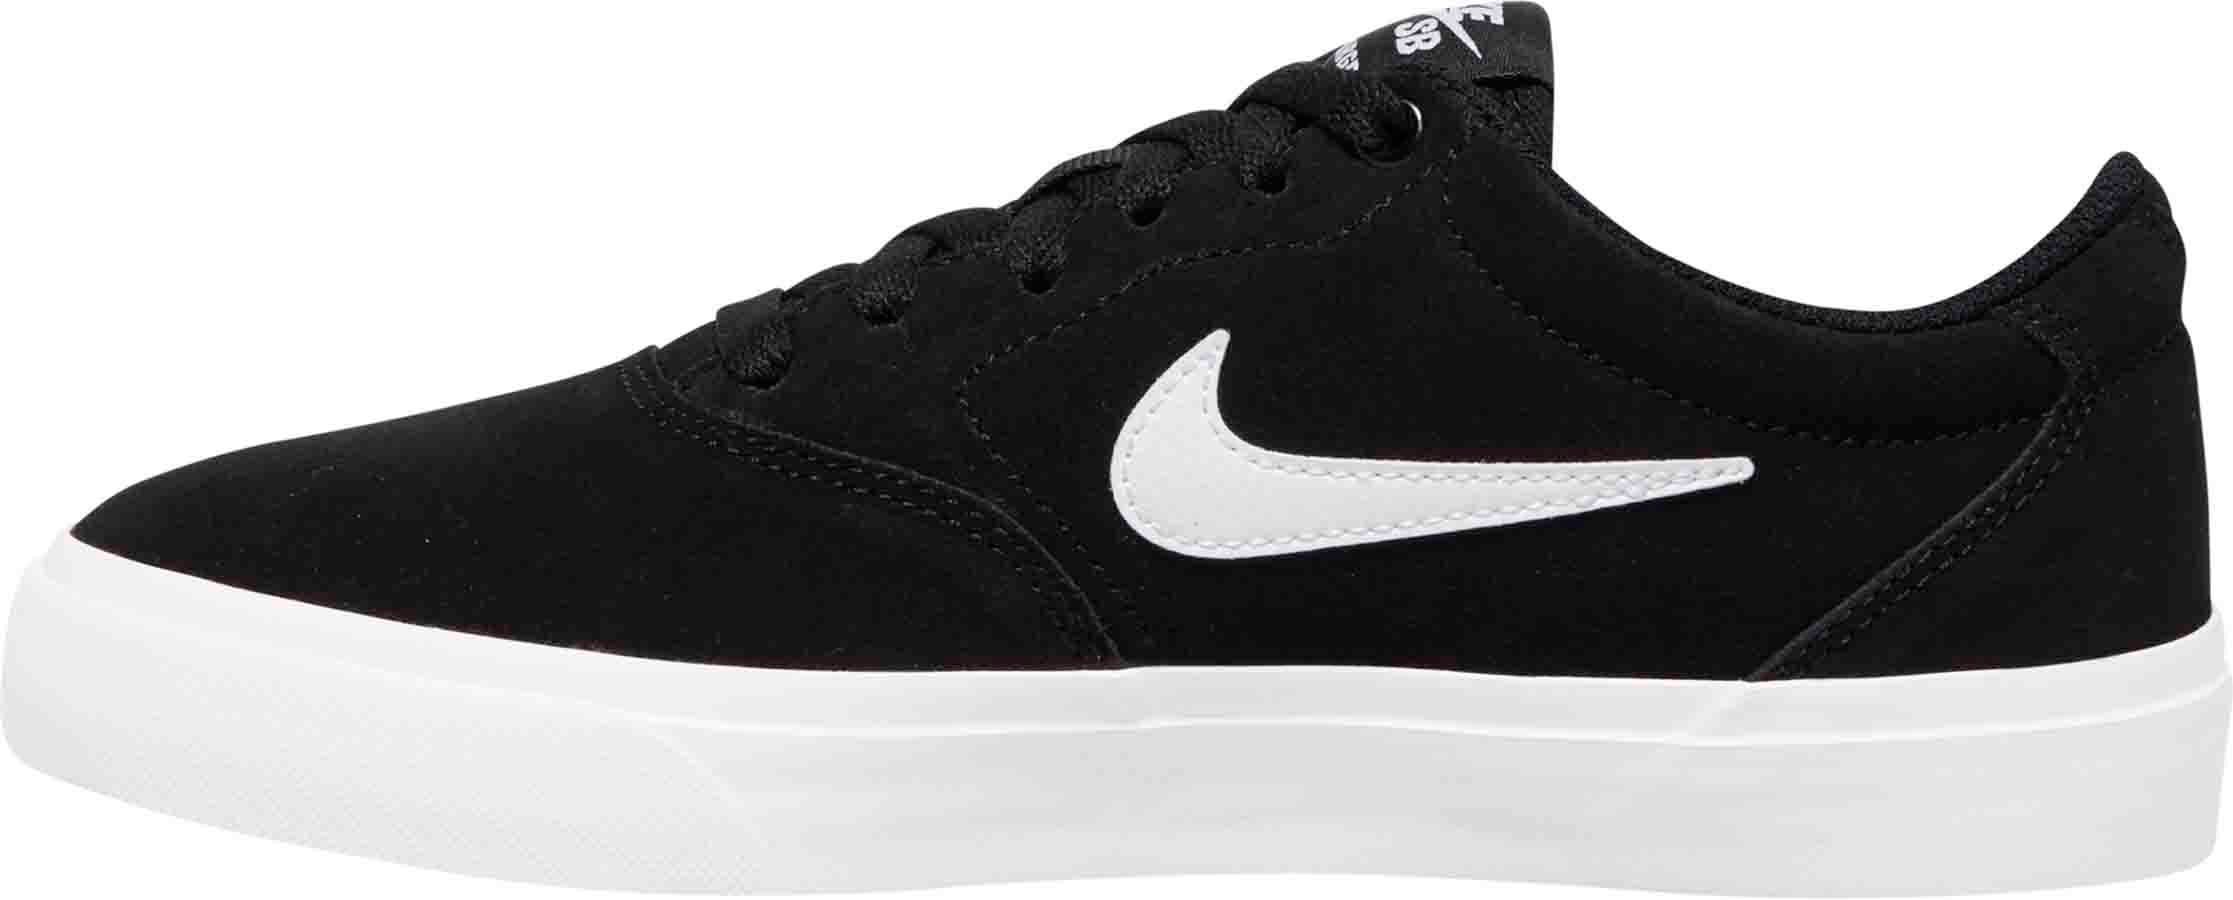 Nike SB Charge Suede Womens Skate Shoes